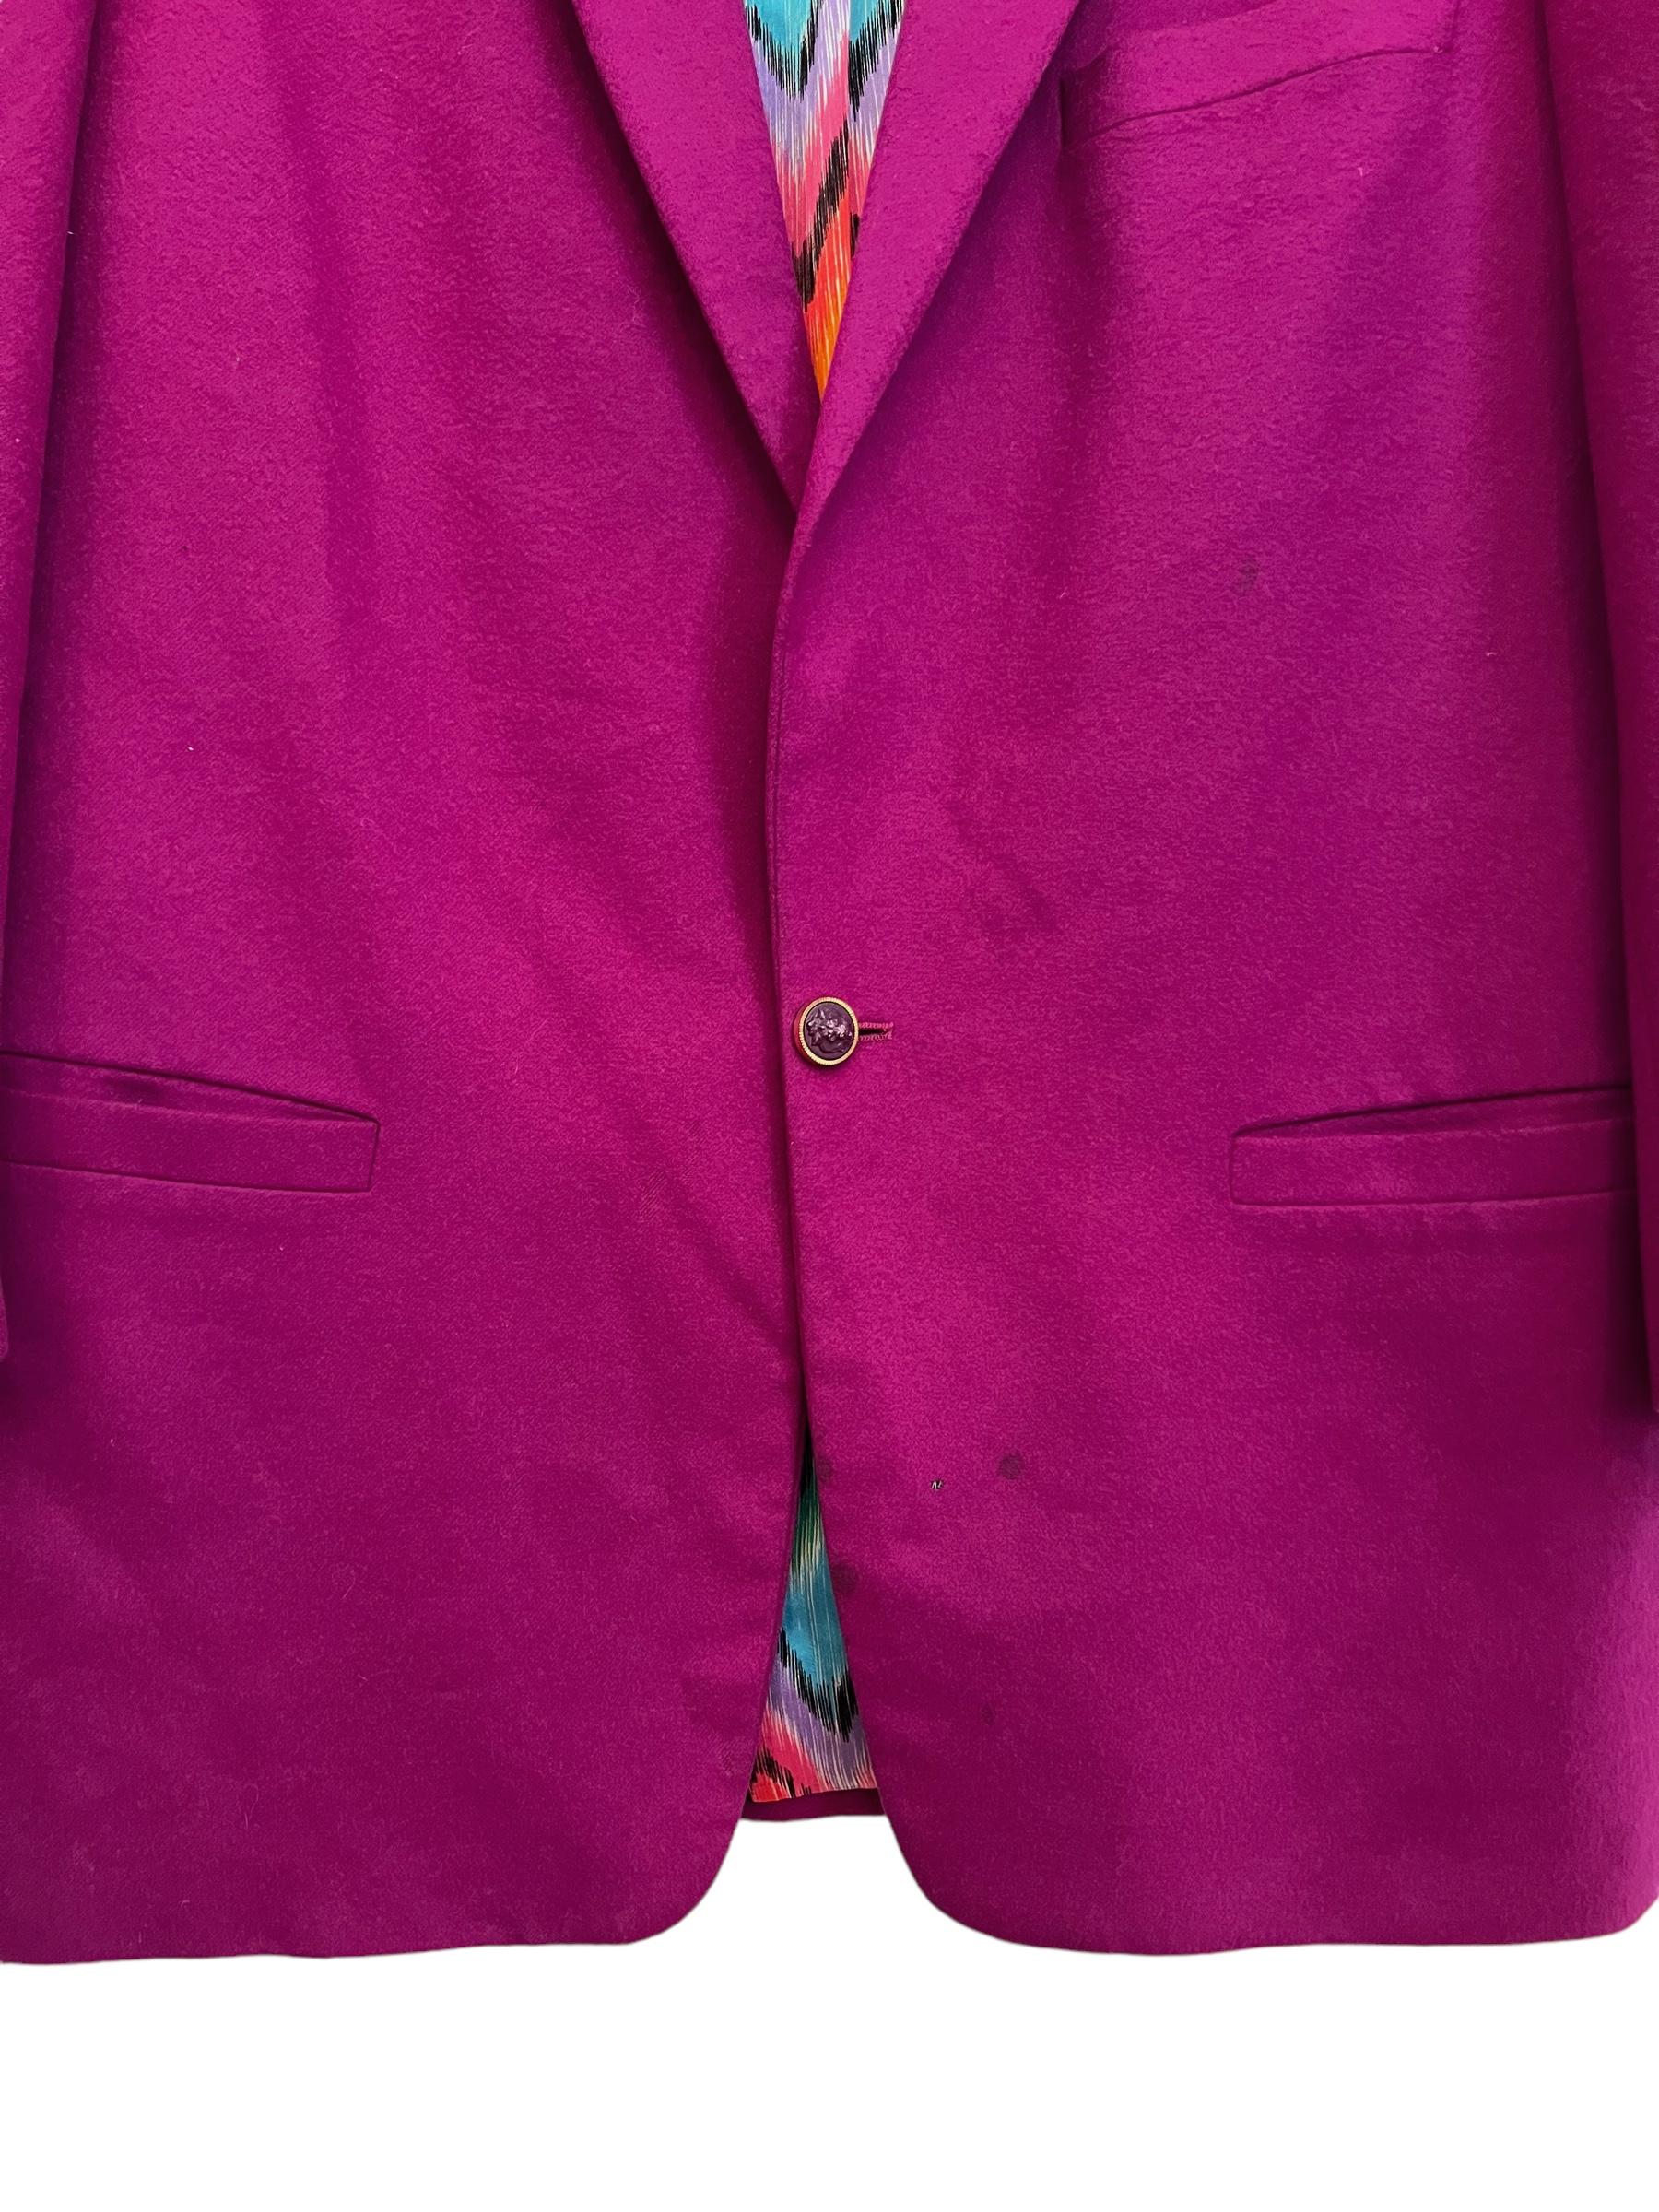 Versus by Gianni Versace Magenta Pink Rainbow Lined Cashmere Blazer Suit Jacket For Sale 11